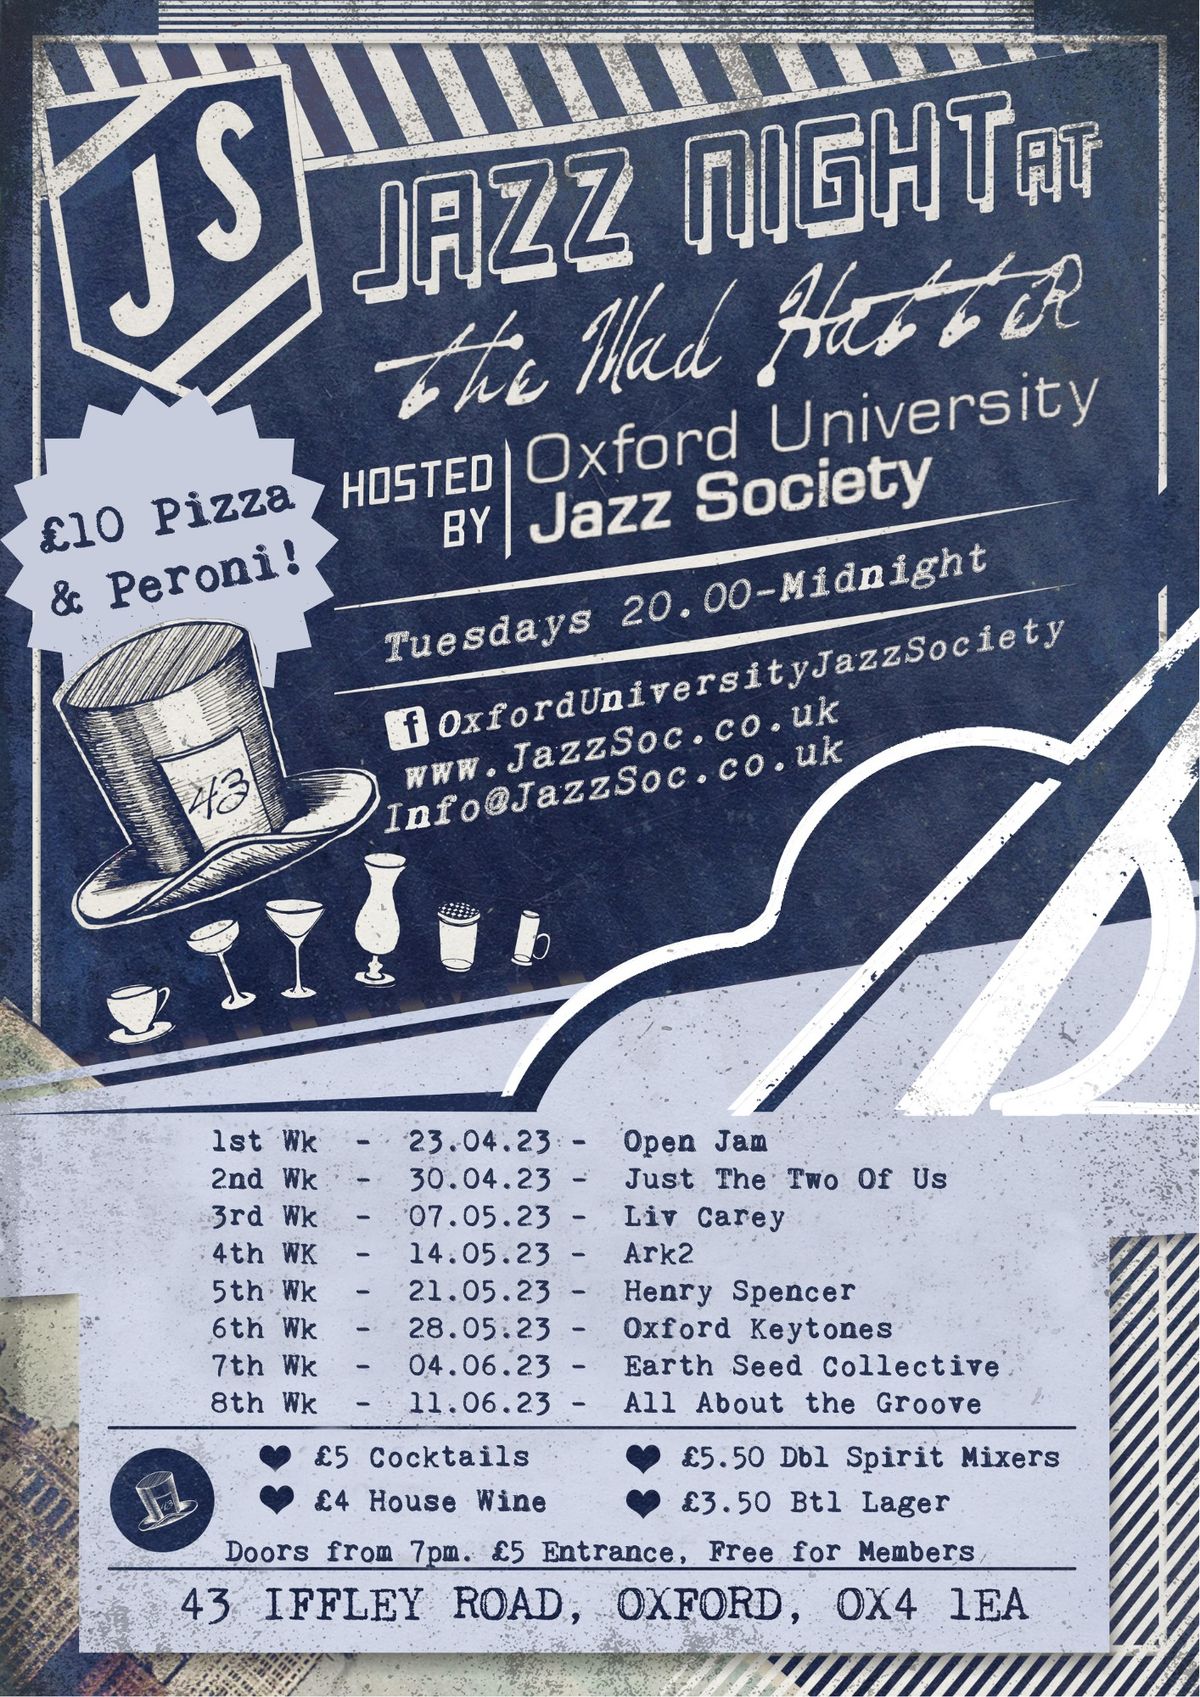 JazzSoc @The Mad Hatter Oxford